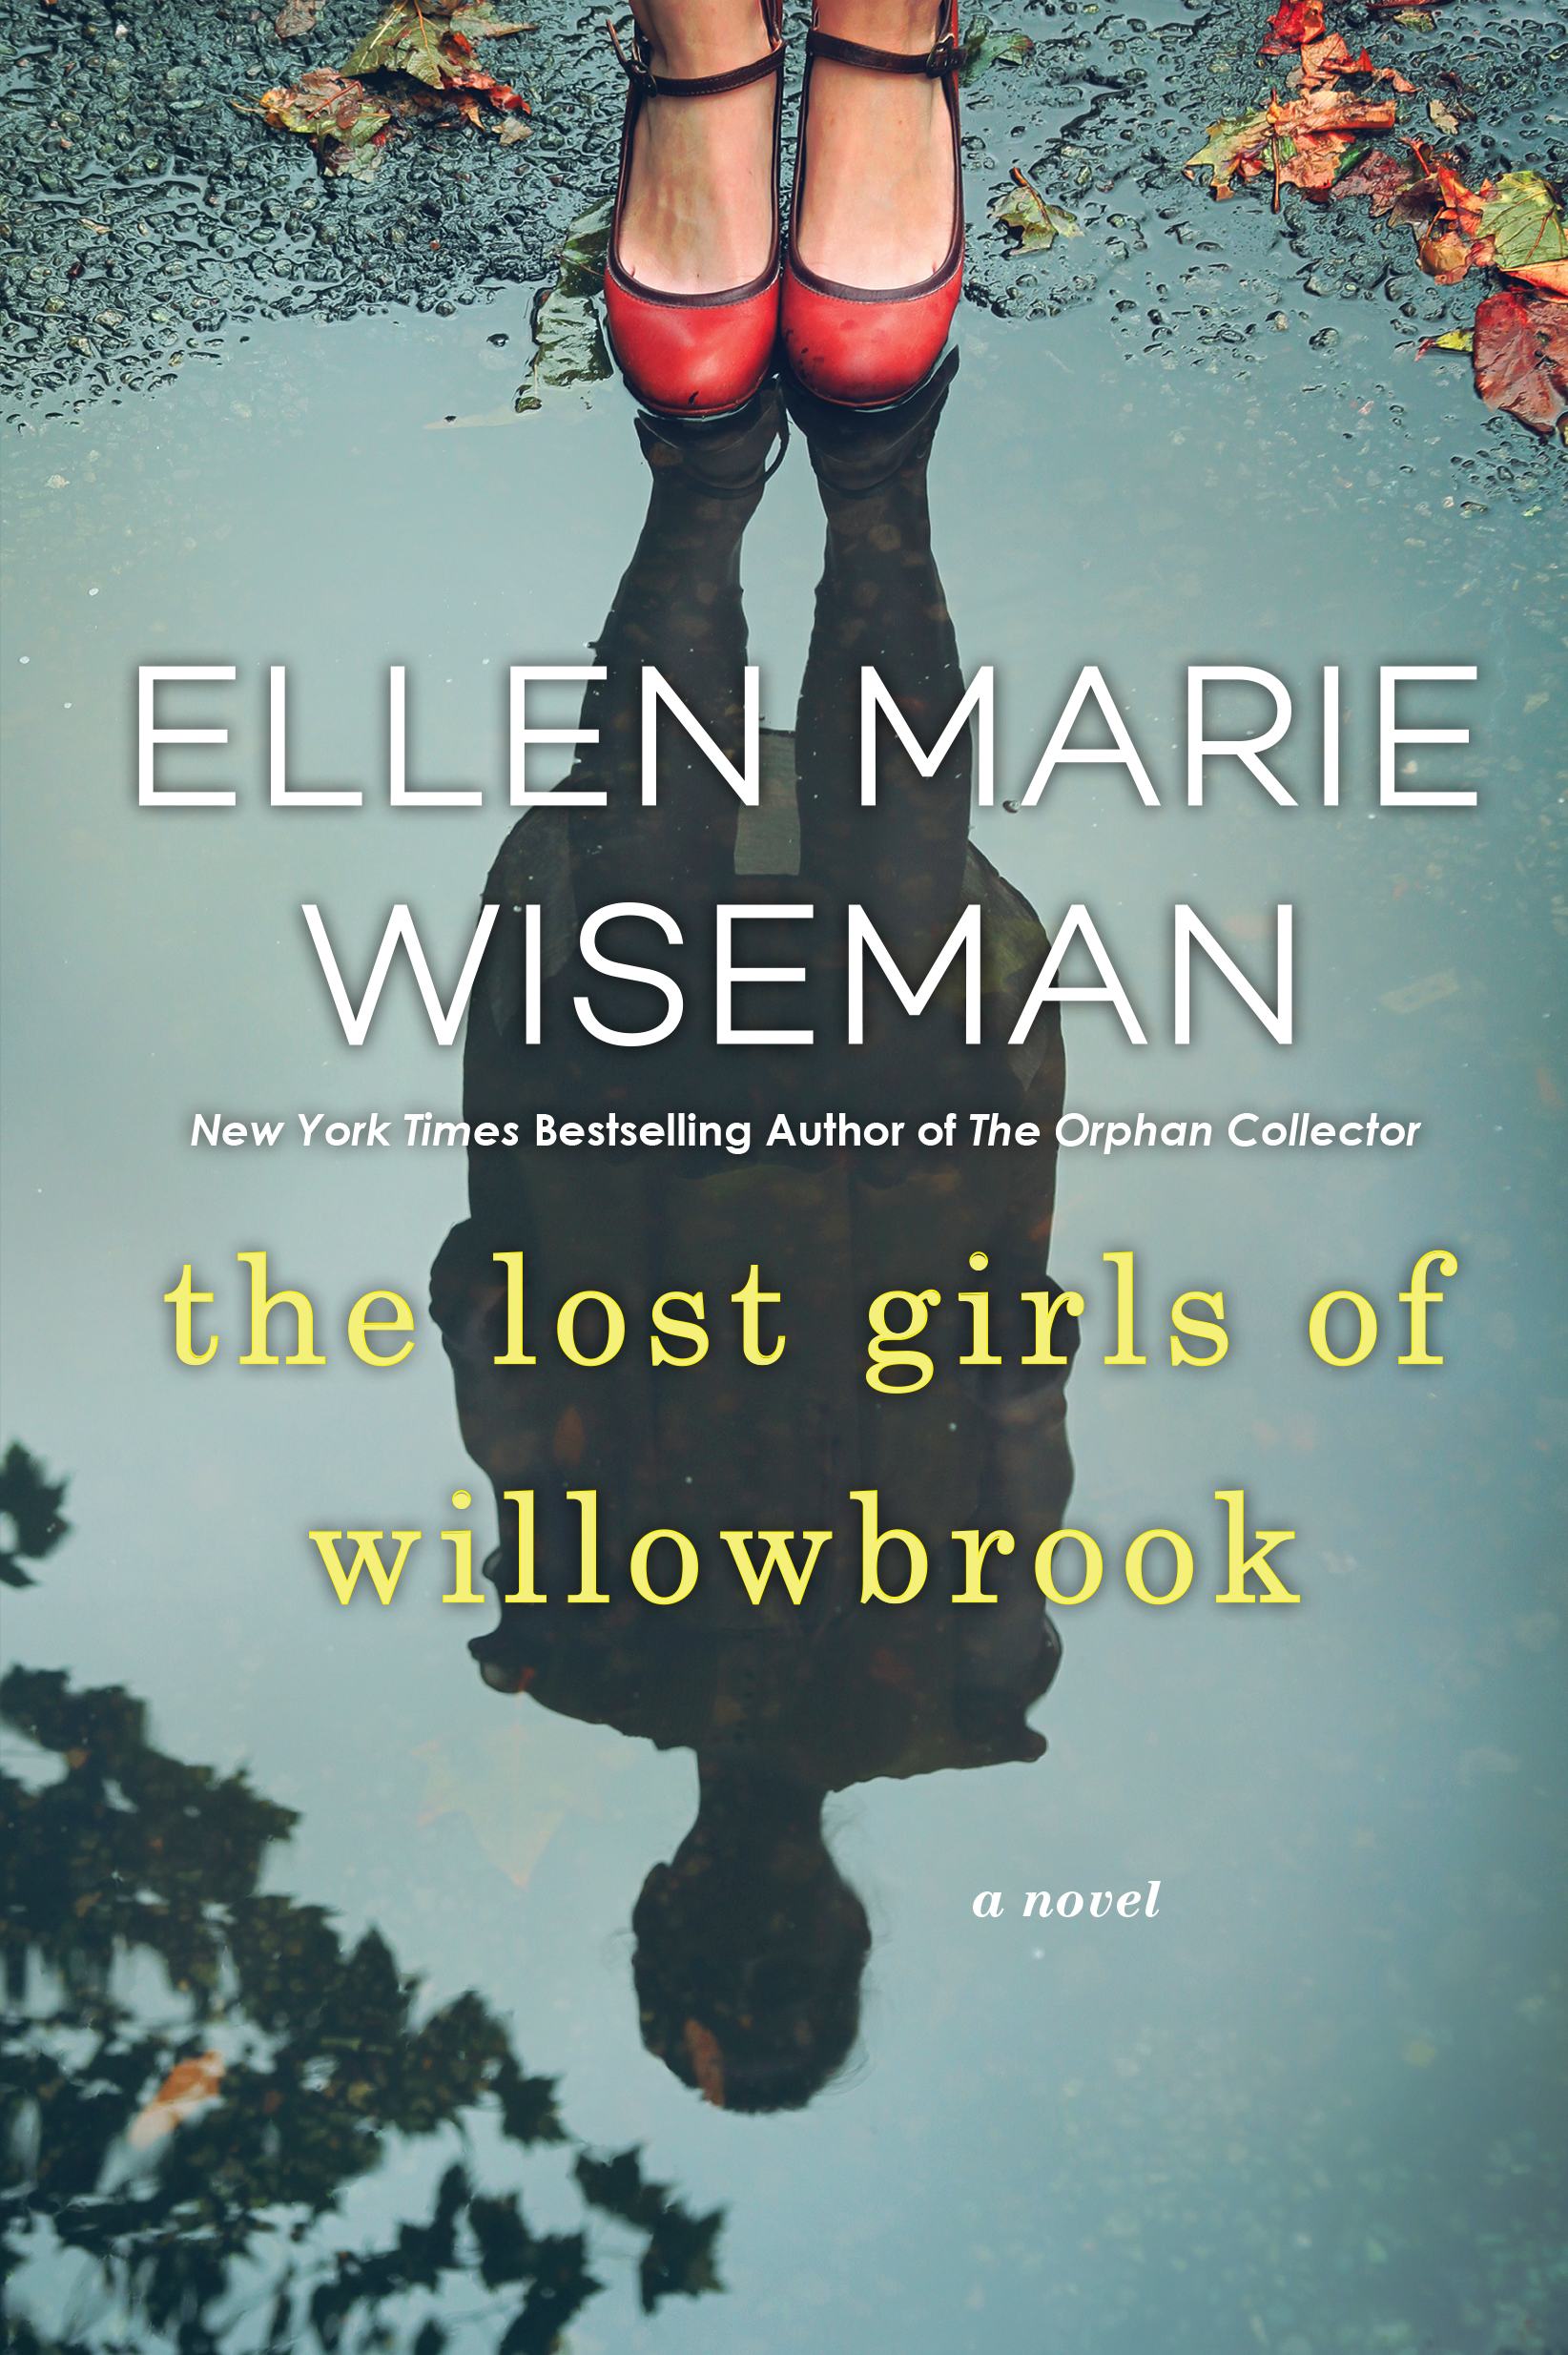 THE-LOST-GIRLS-OF-WILLOWBROOK_WISEMAN_TRD_COMP (1)